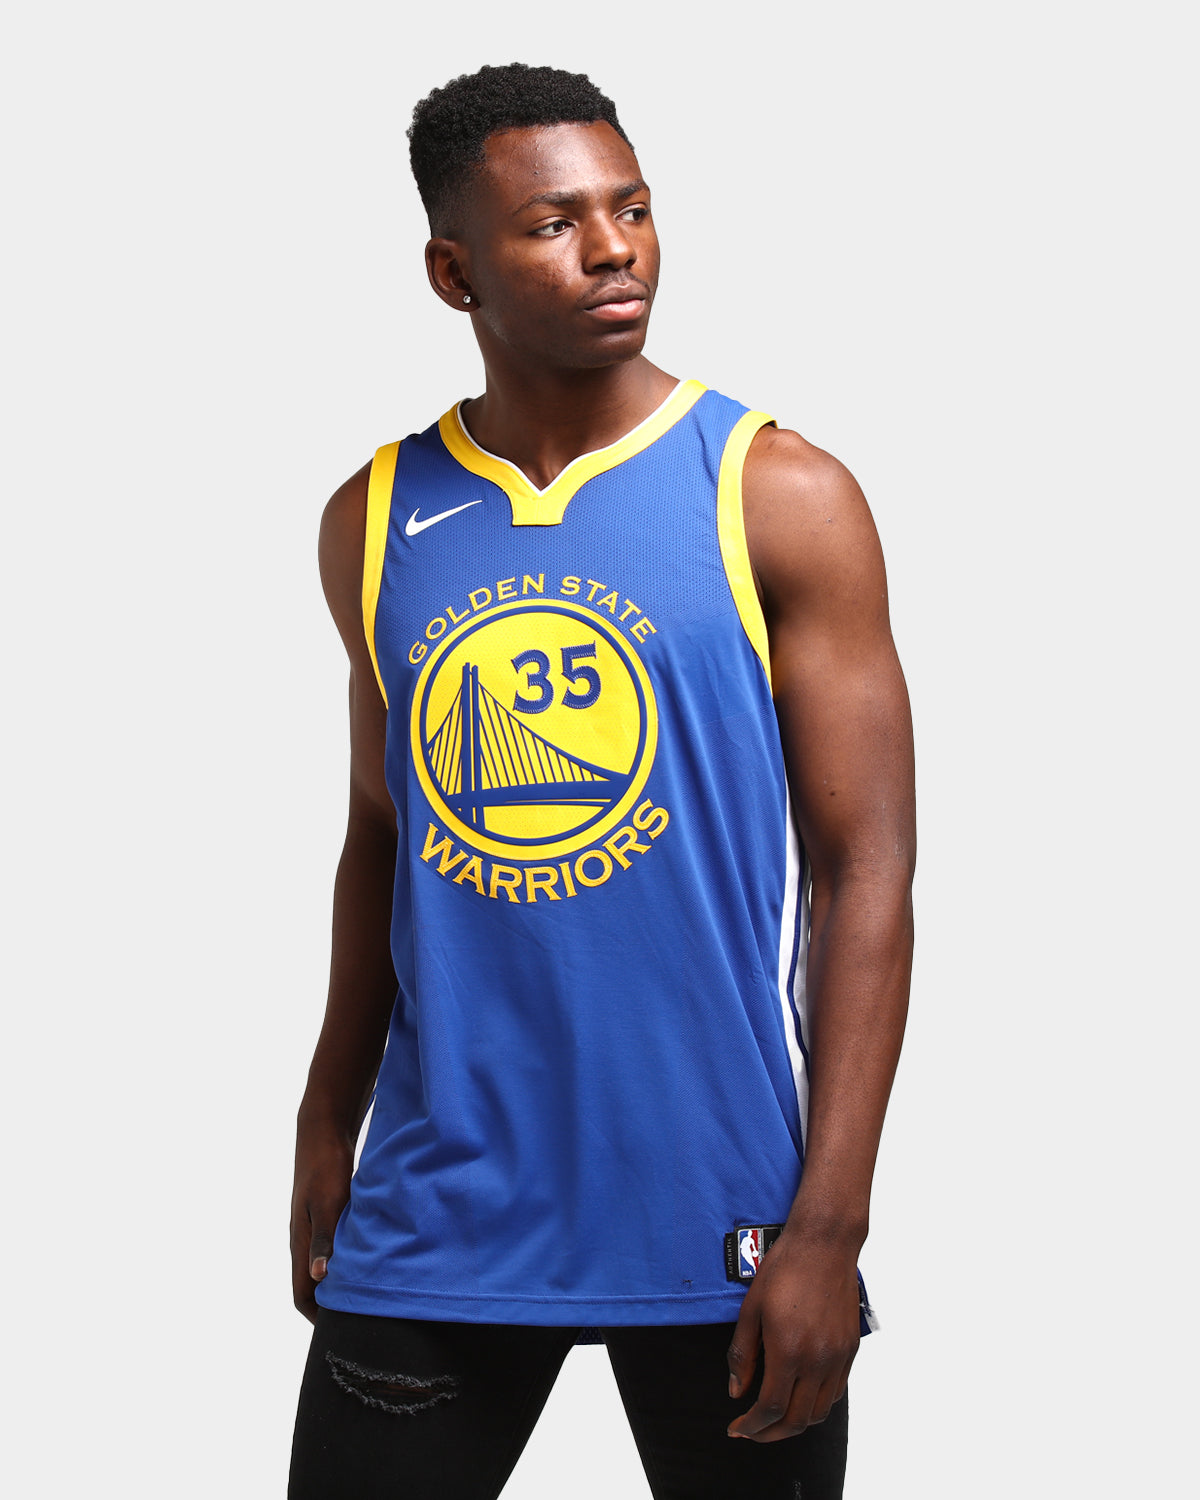 authentic durant warriors jersey